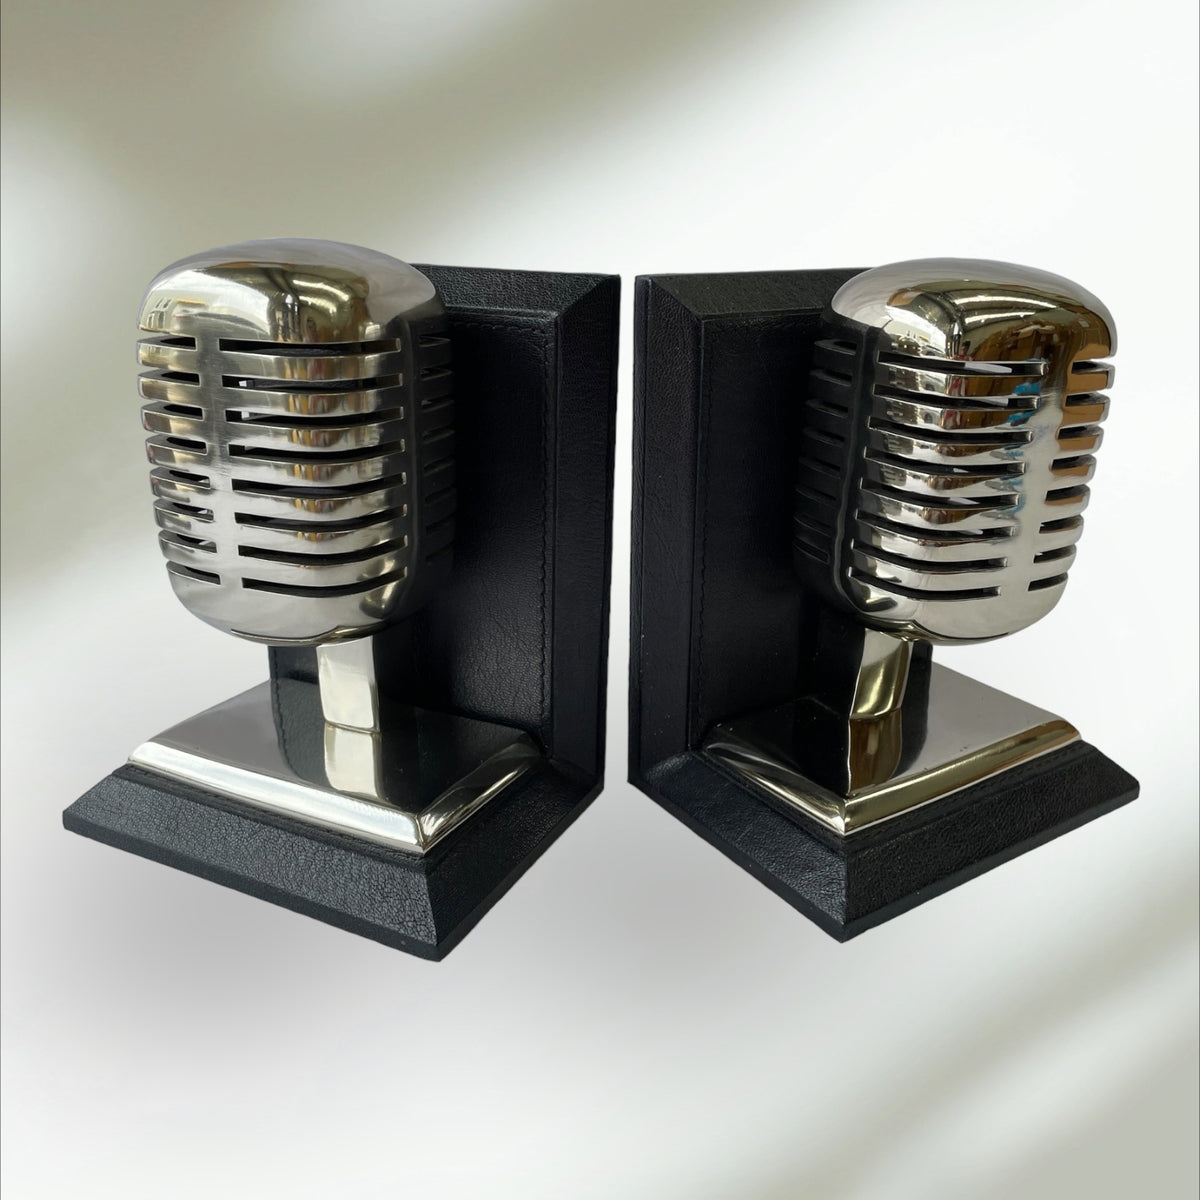 Set of 2 Microphone Bookends - Black Leather-NOTBRAND